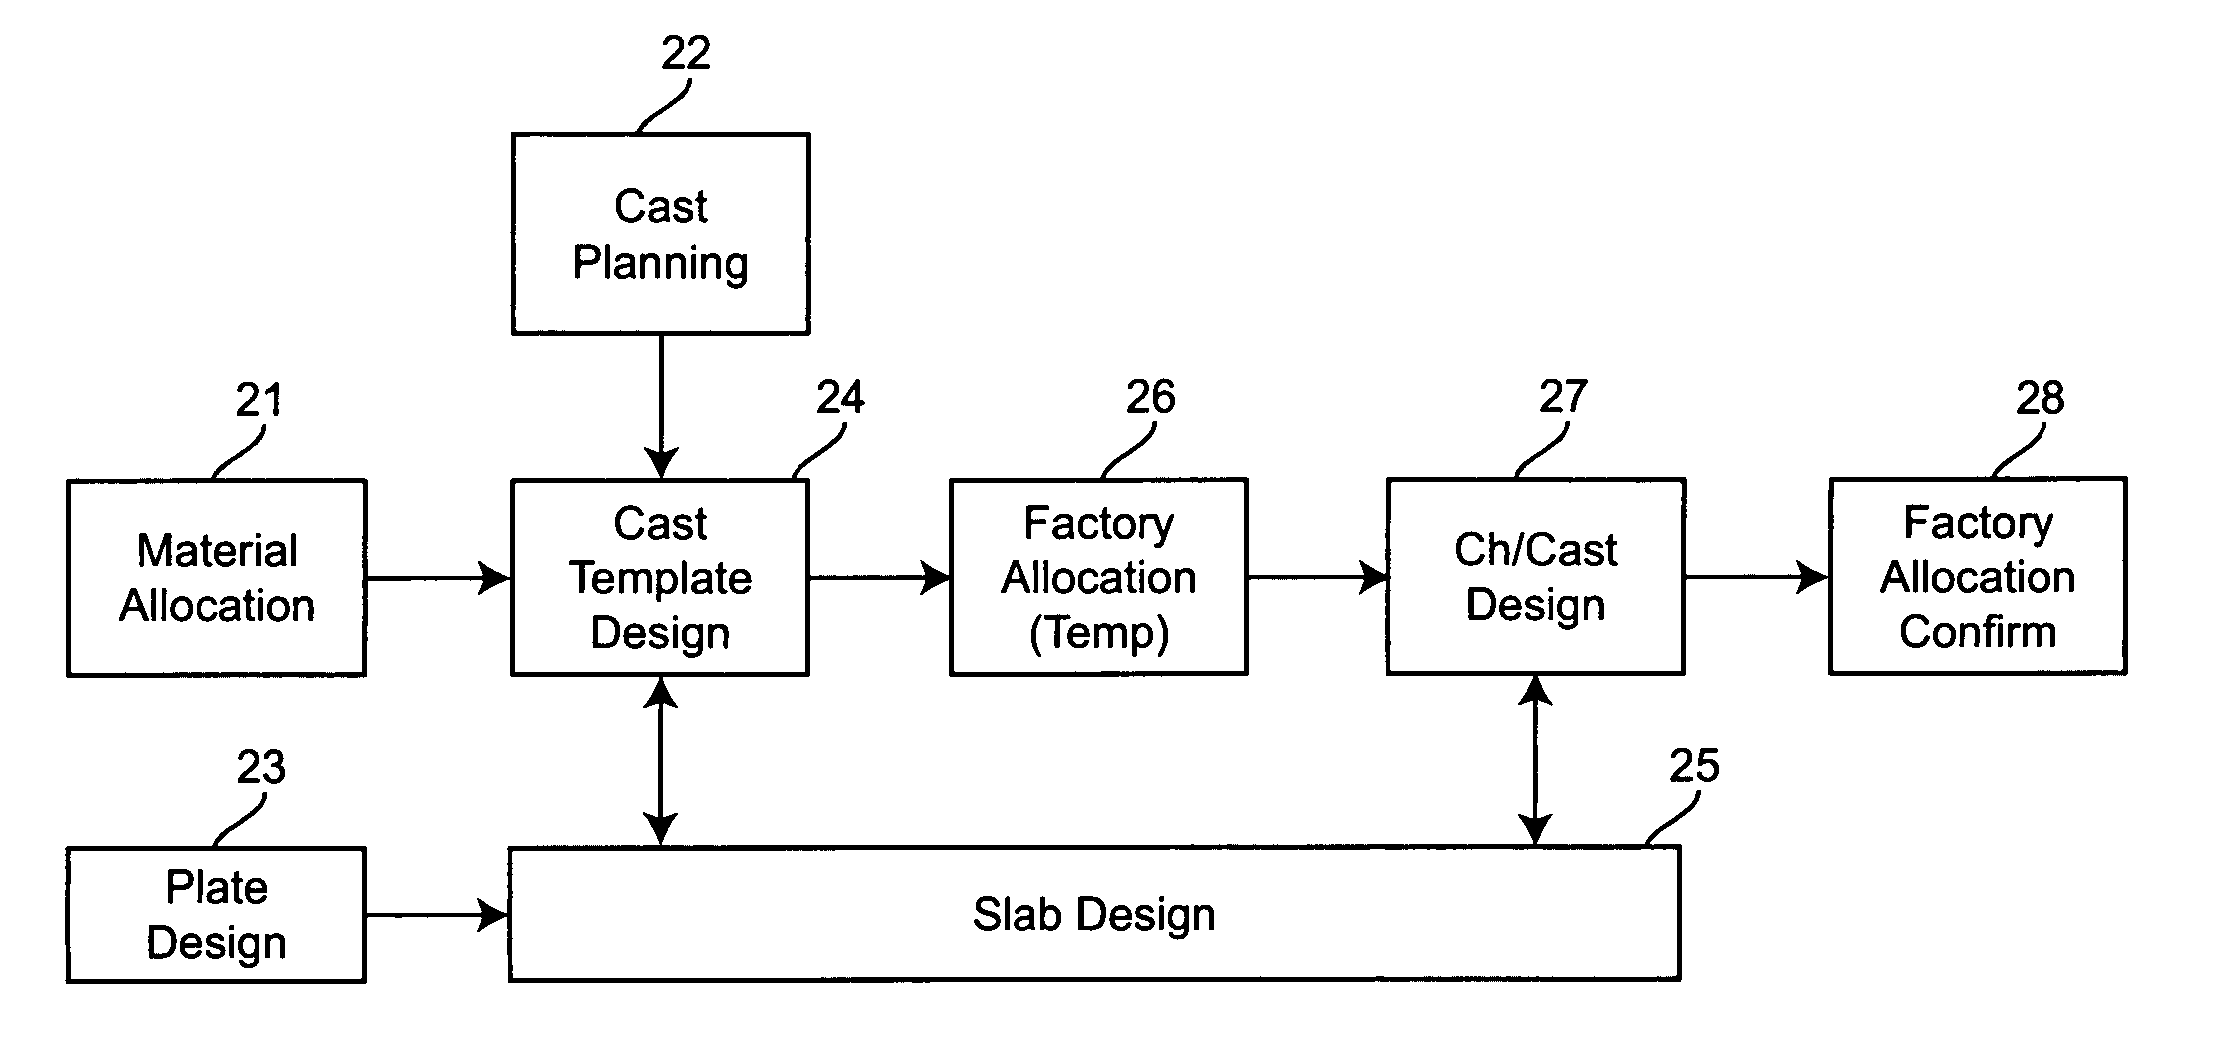 Method for production design and operations scheduling for plate design in the steel industry